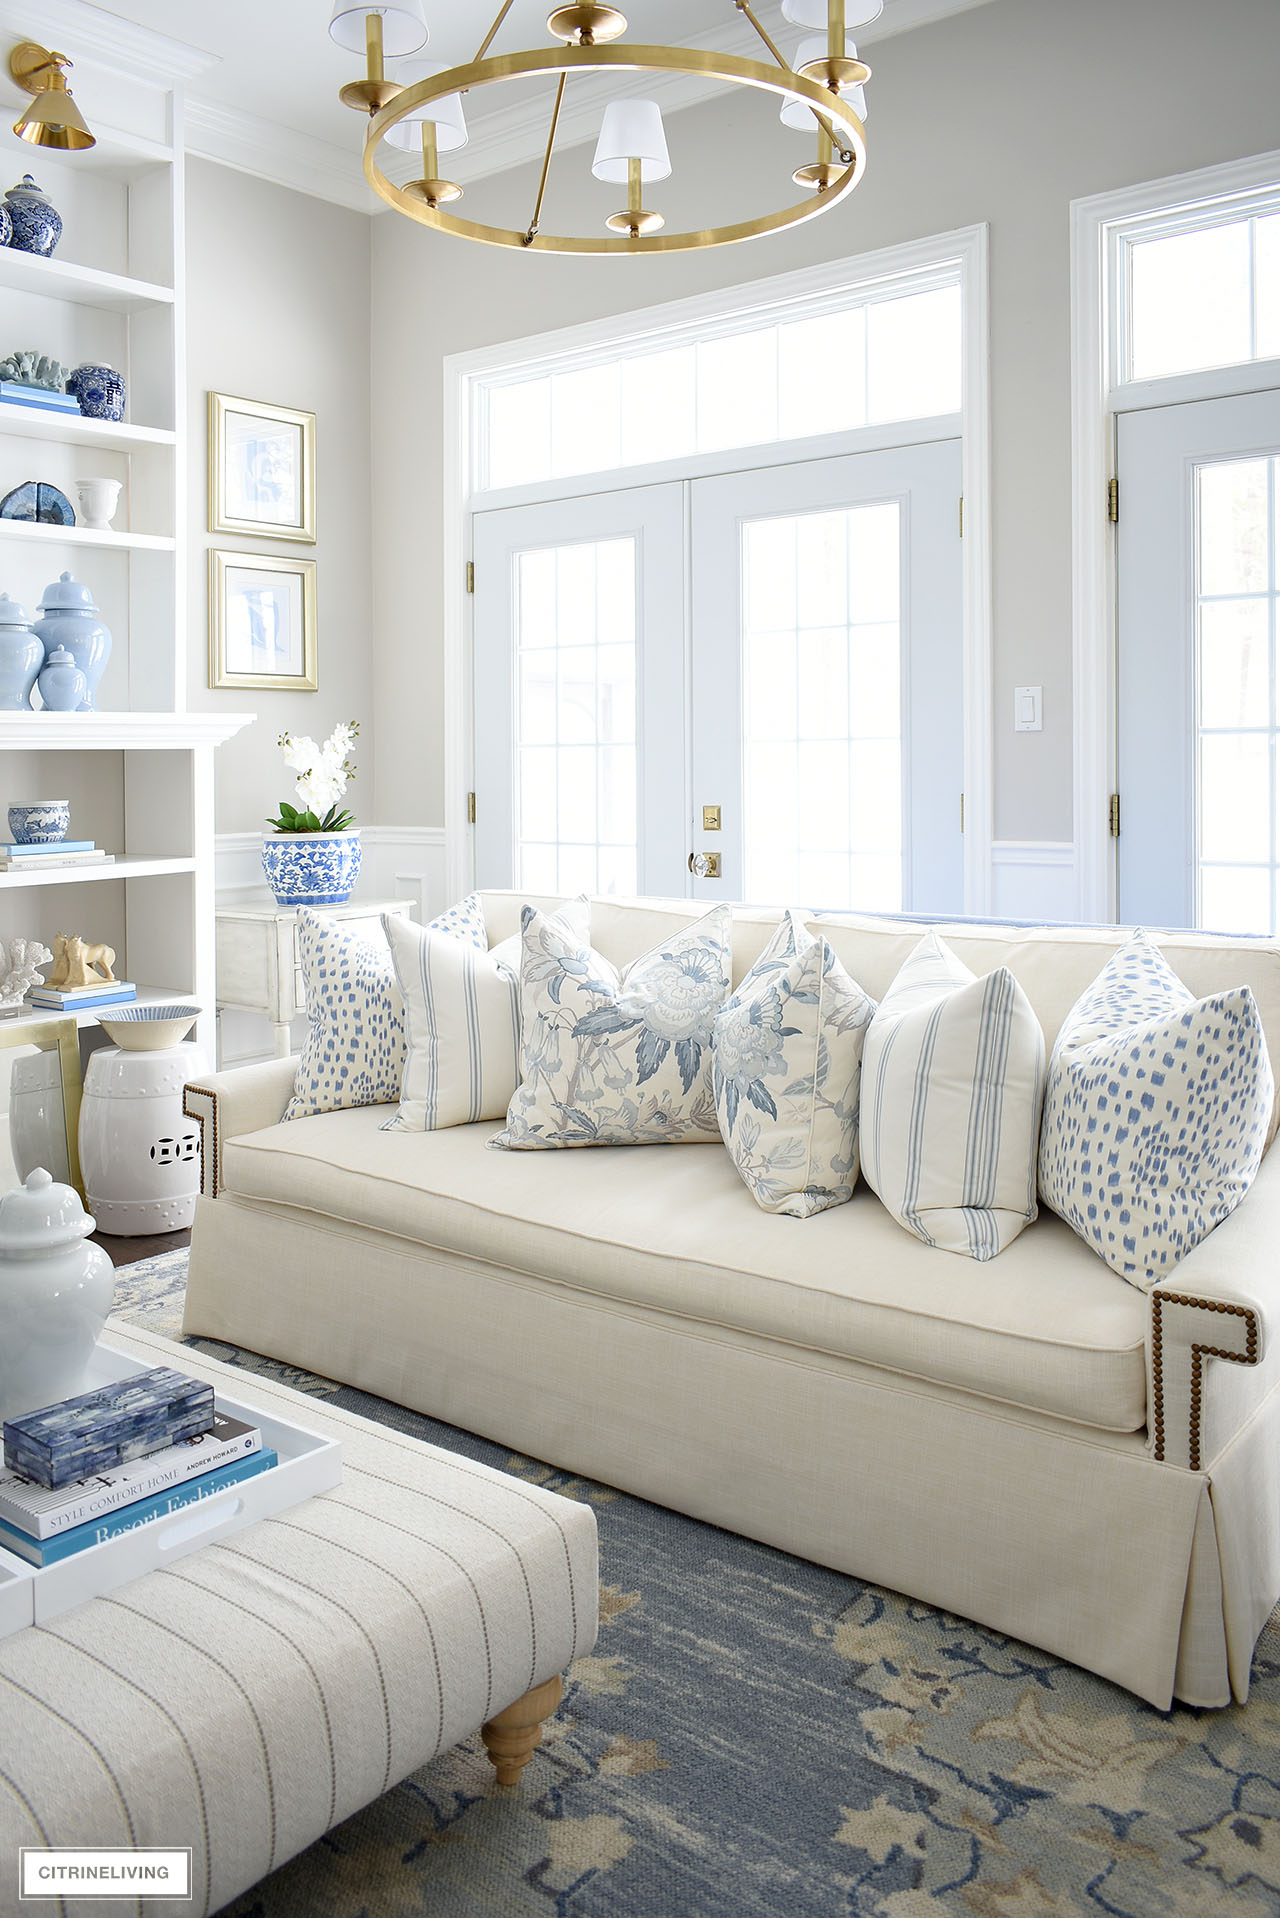 Living room decorated for spring with layers of blue and white decor.